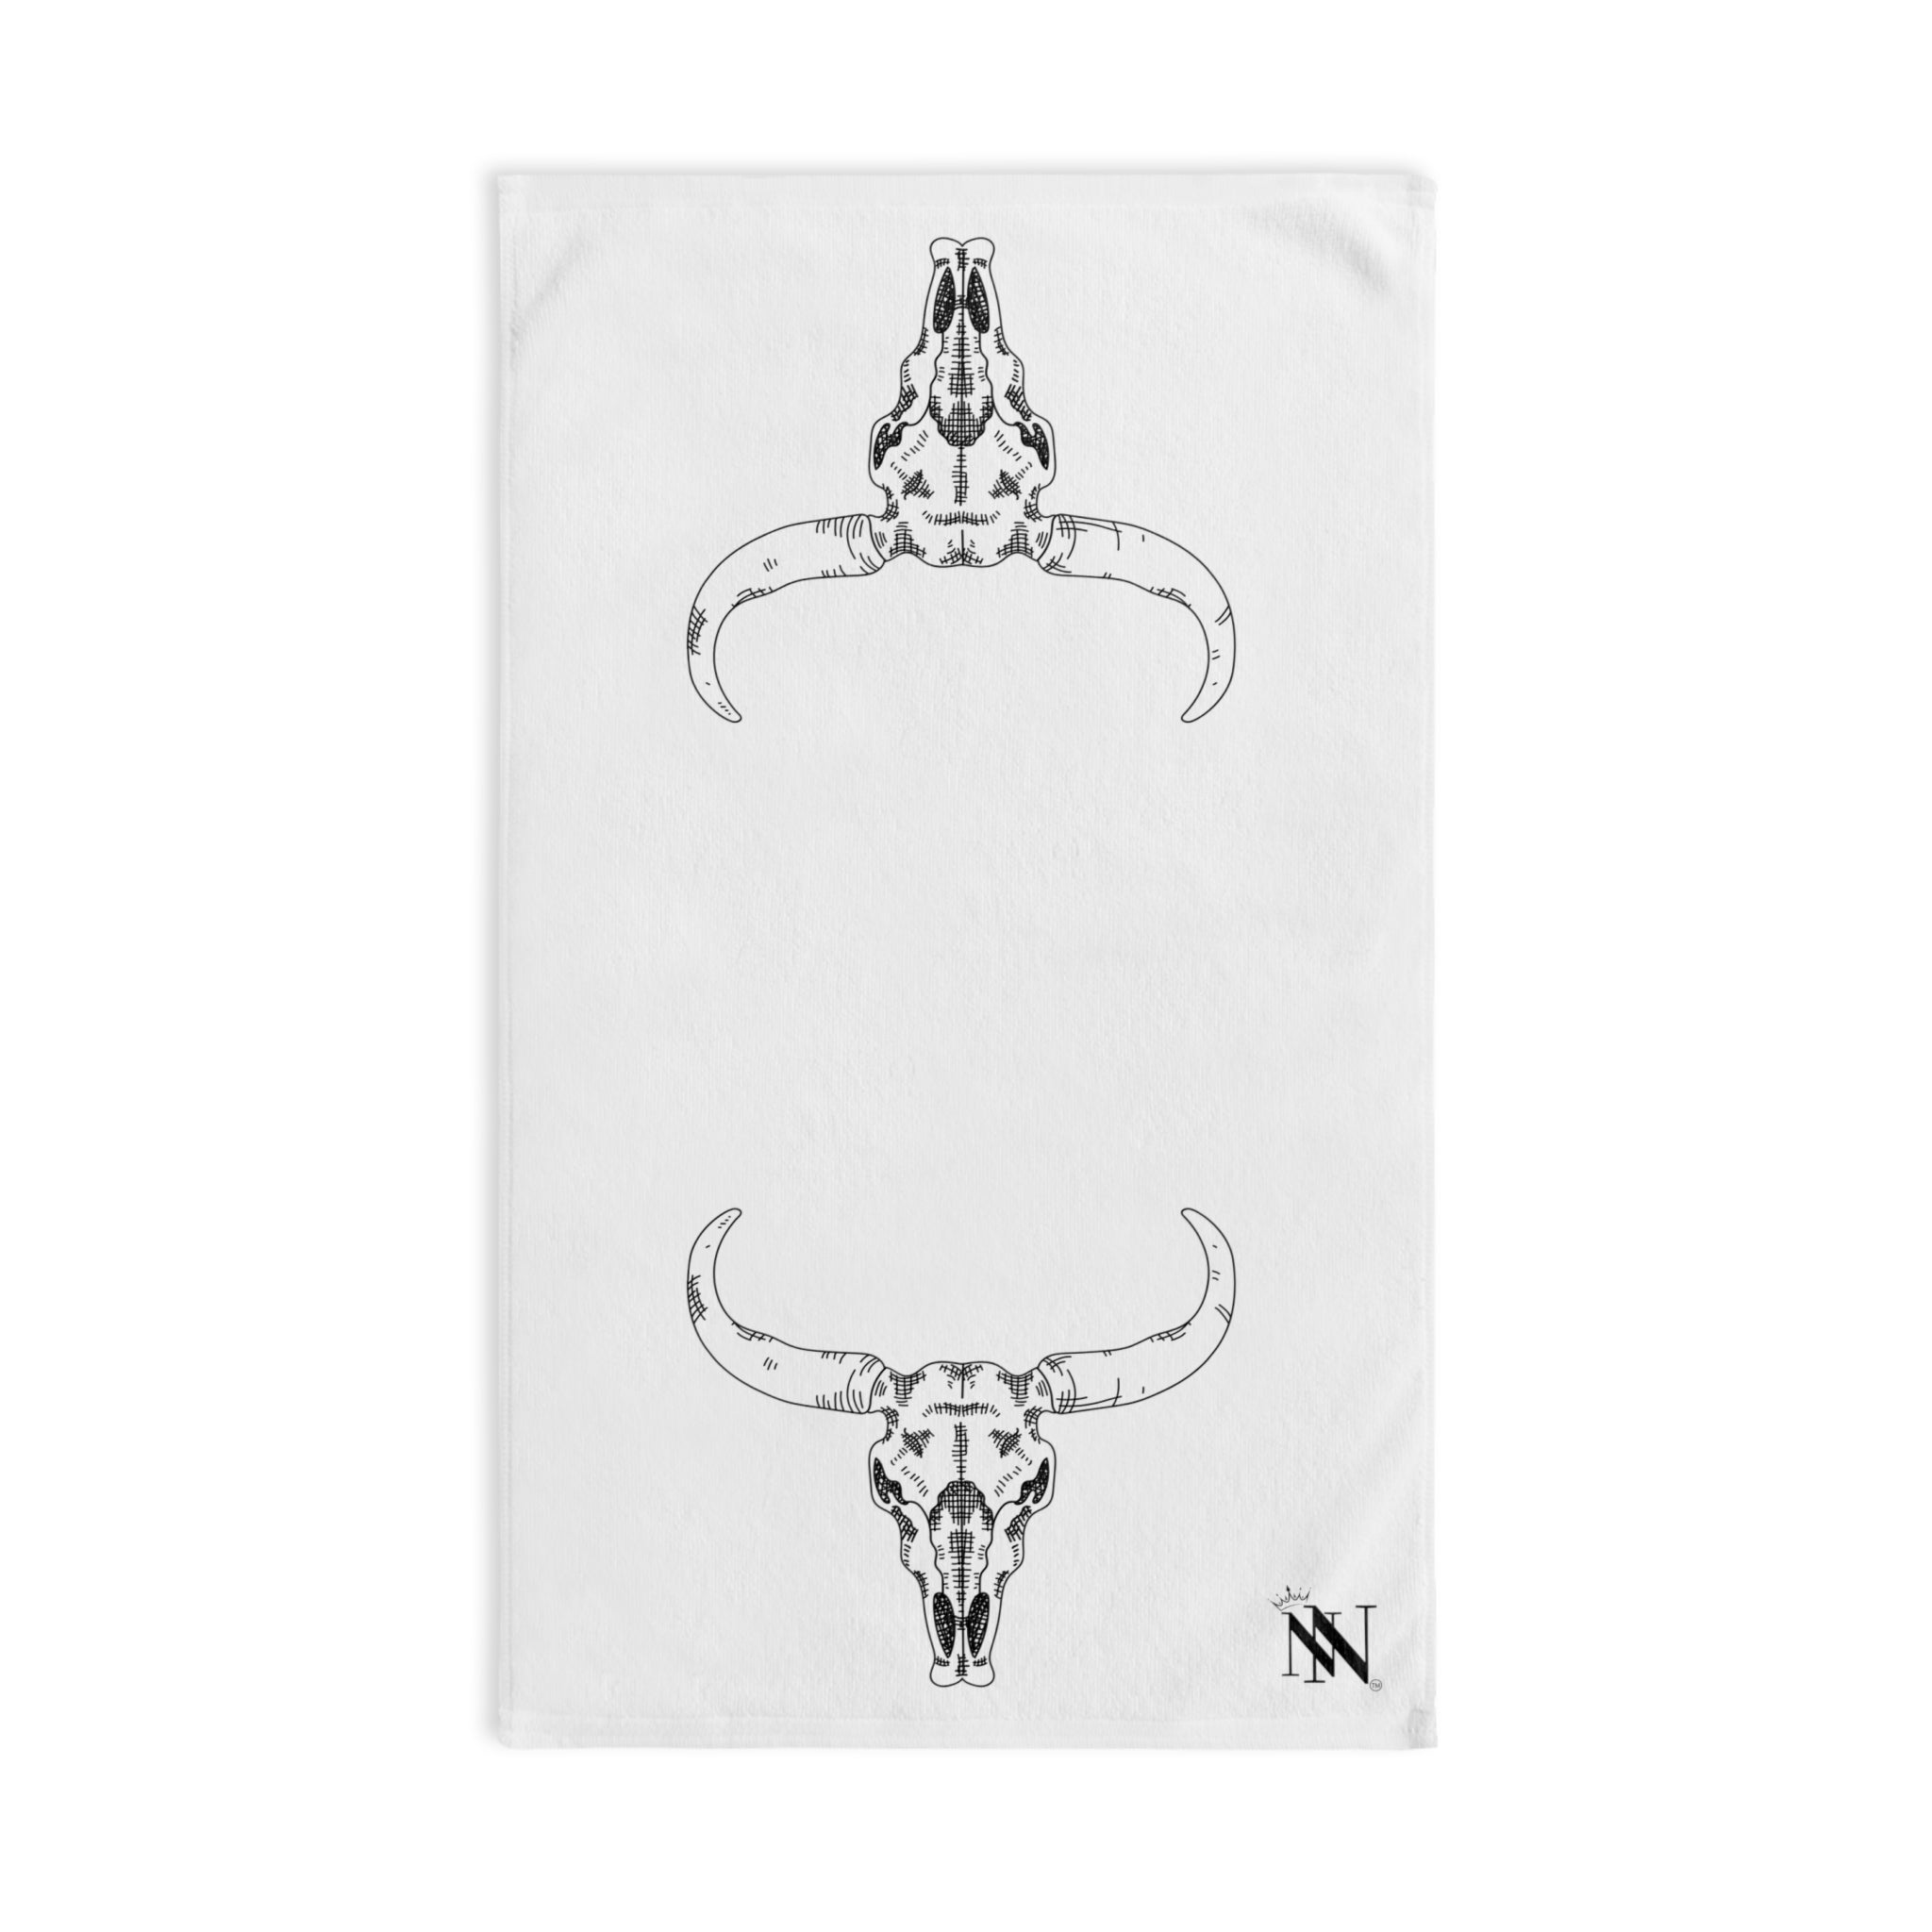 Black Mr Mrs Cow Skull White | Funny Gifts for Men - Gifts for Him - Birthday Gifts for Men, Him, Her, Husband, Boyfriend, Girlfriend, New Couple Gifts, Fathers & Valentines Day Gifts, Christmas Gifts NECTAR NAPKINS